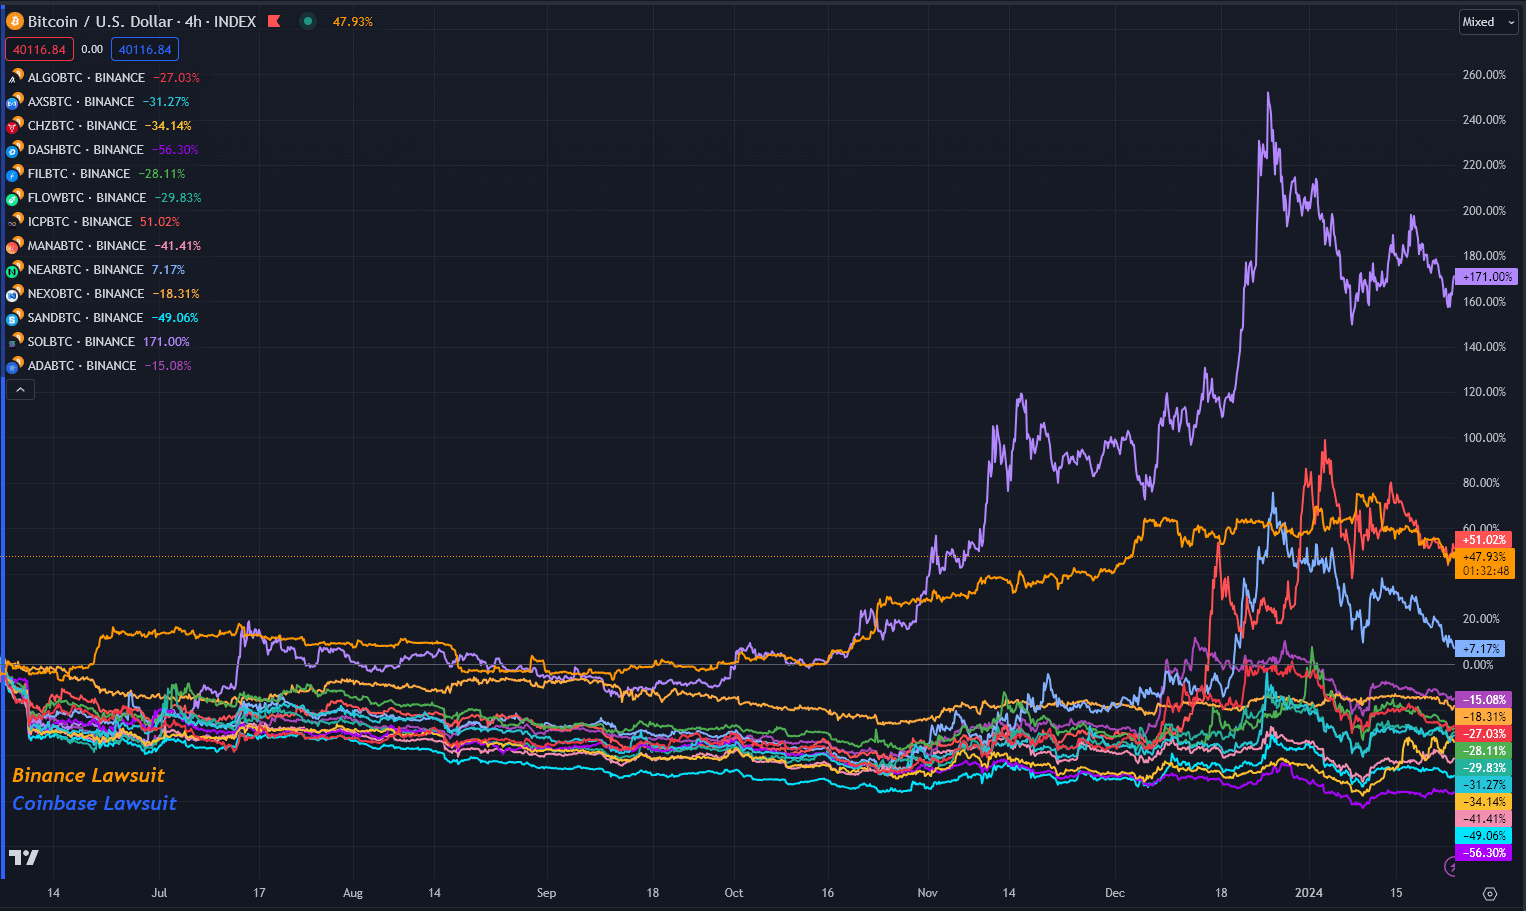 Token performance since Binance and Coinbase lawsuits